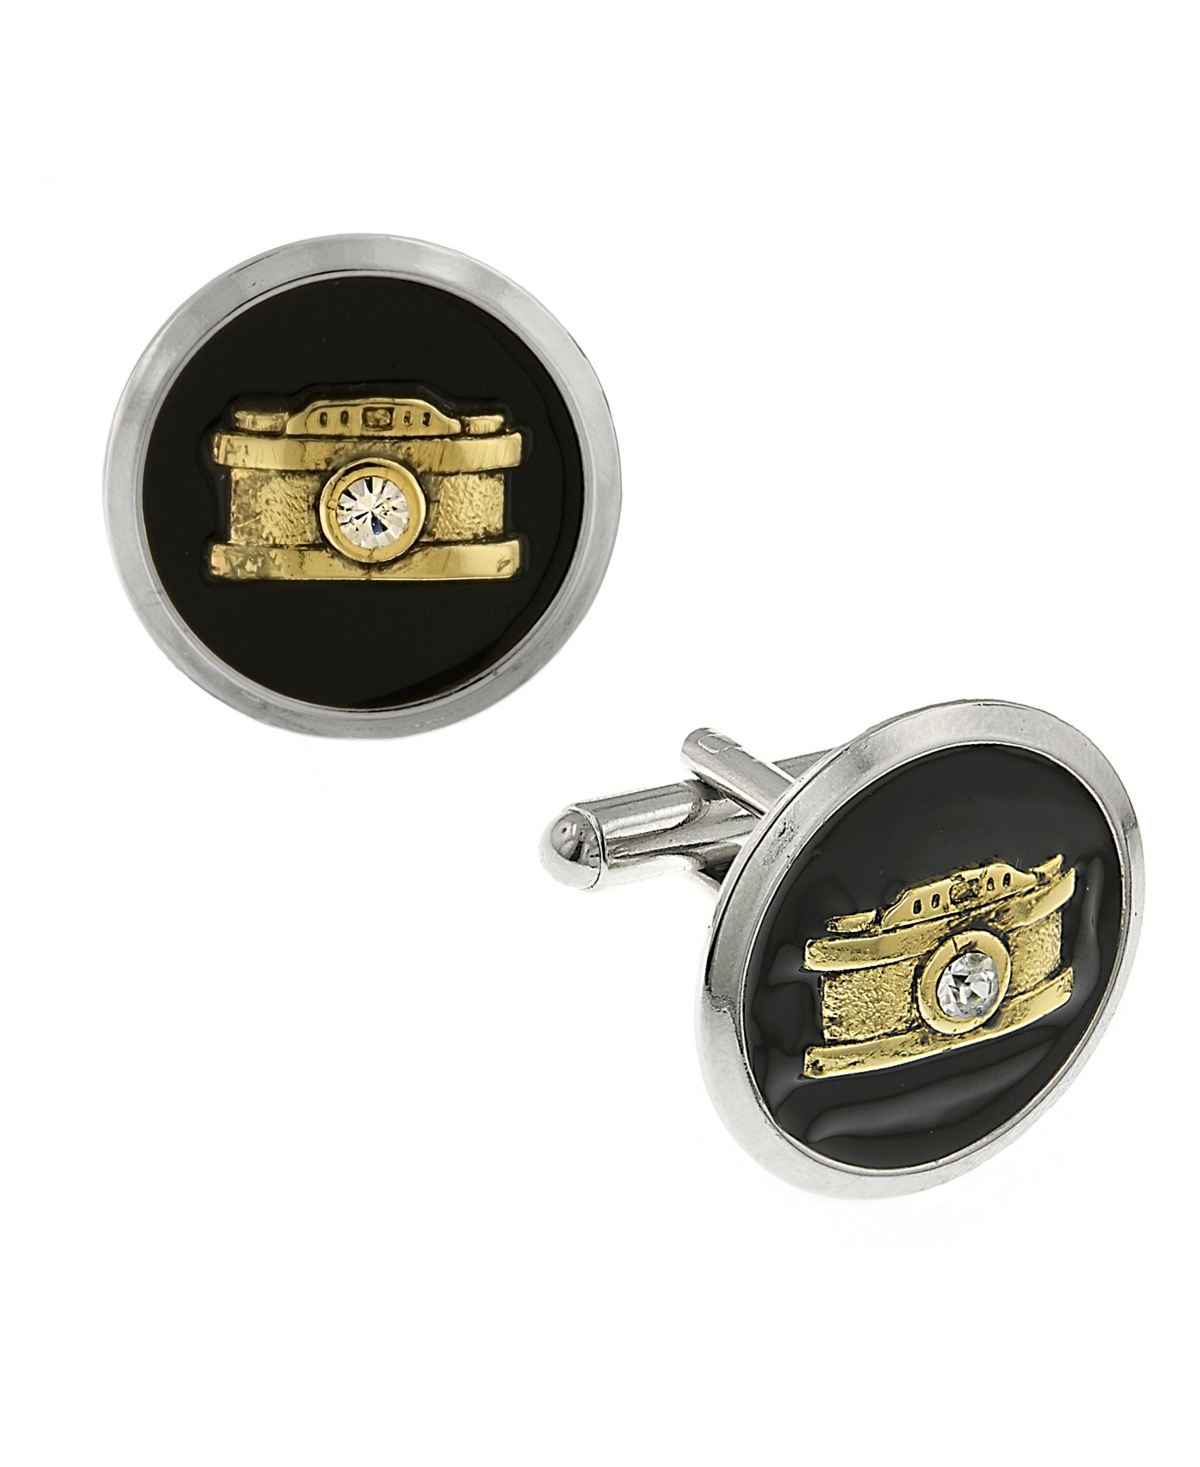 1928 Jewelry Silver-tone And 14k Gold-plated Enamel Crystal Camera Cufflinks In Black